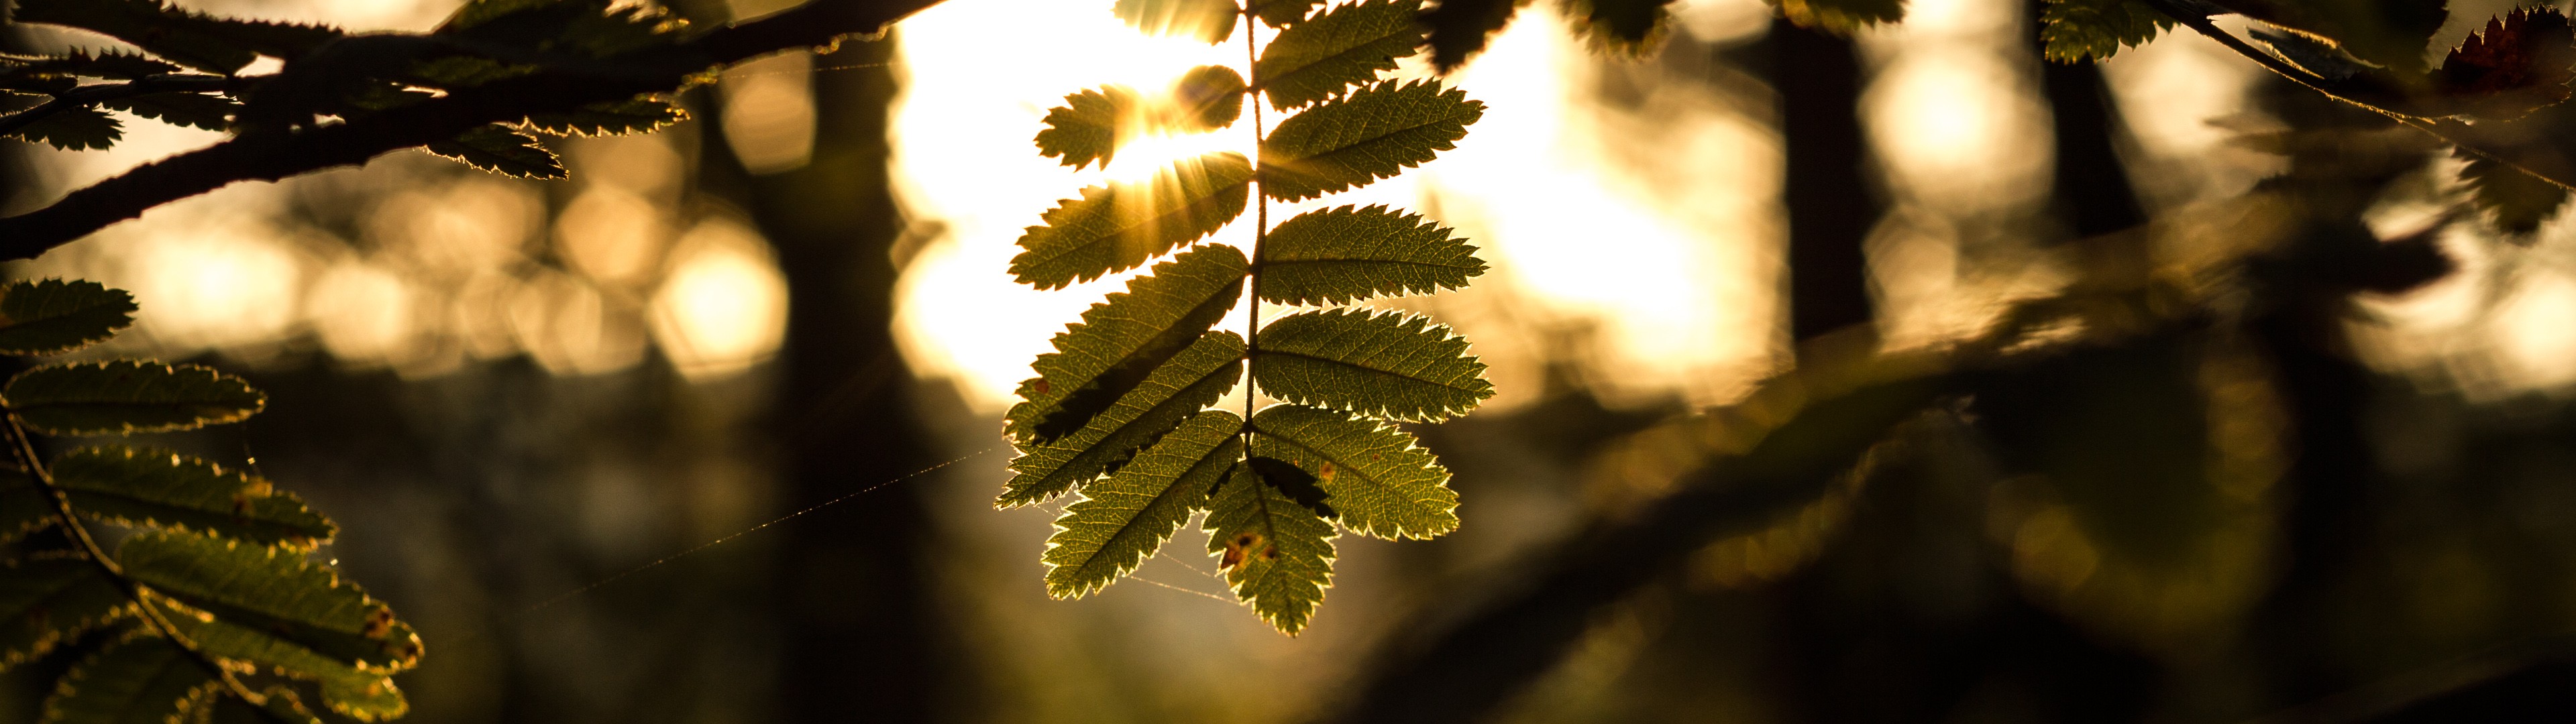 Wallpaper, sunlight, forest, leaves, nature, branch, green, morning, dual monitors, multiple display, bokeh, light, tree, autumn, leaf, flower, season, darkness, woody plant, macro photography 3840x1080